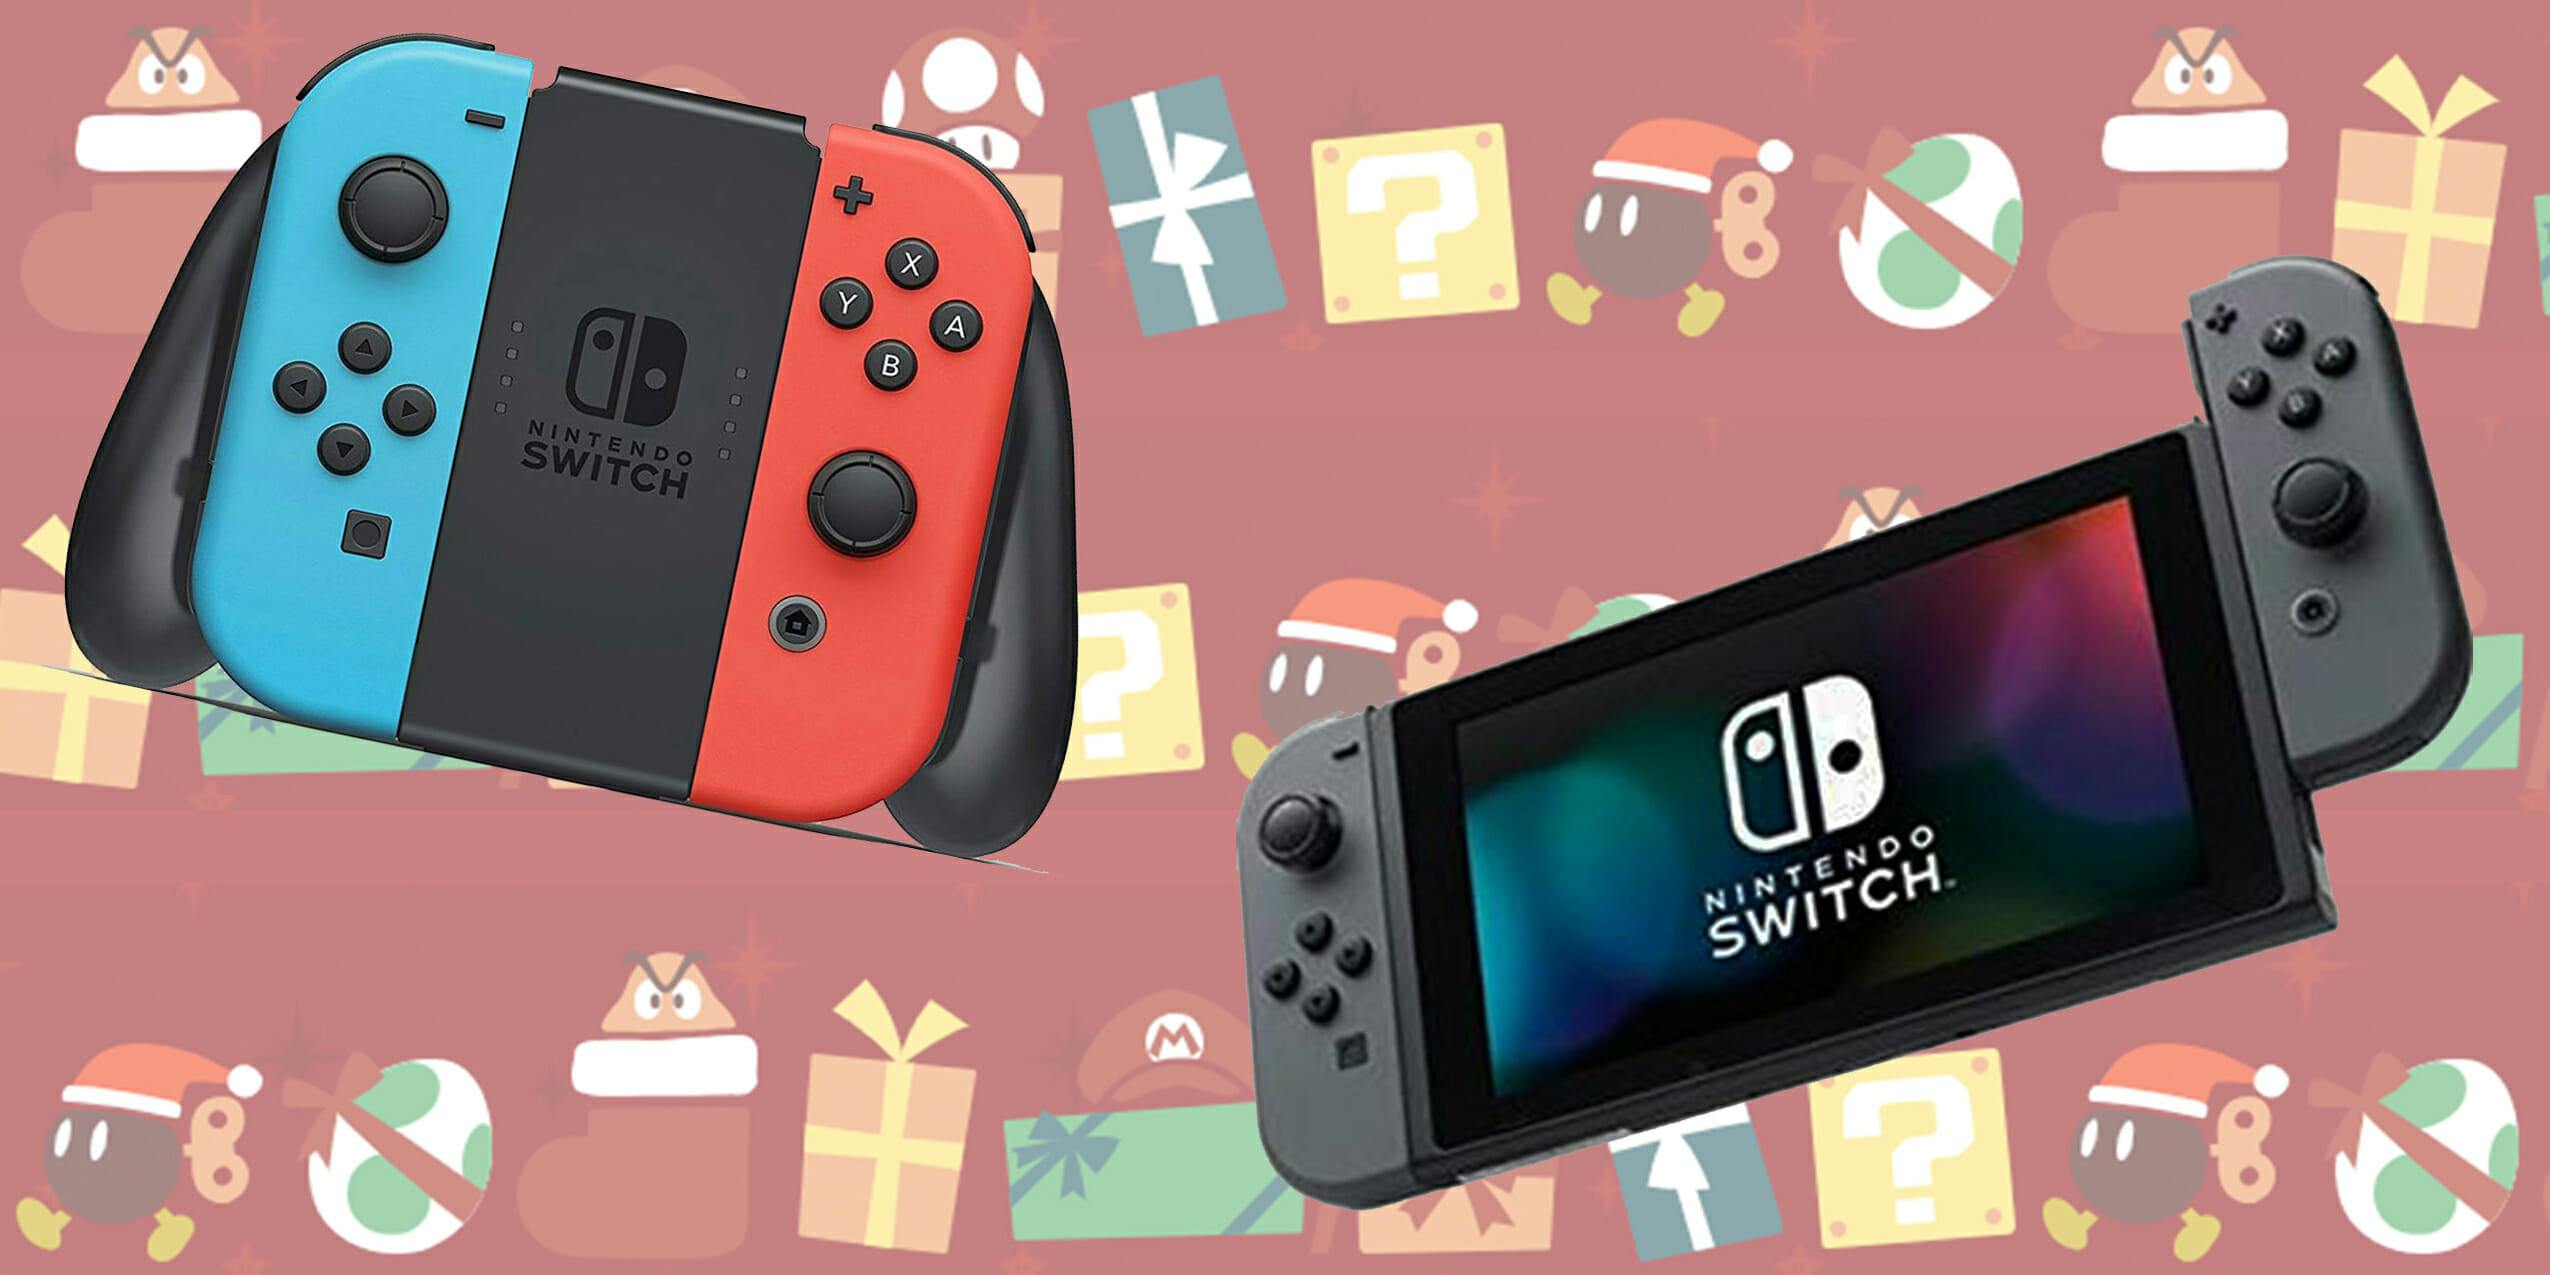 Nintendo Switch Cyber Monday Buy a console, get 35 cash free